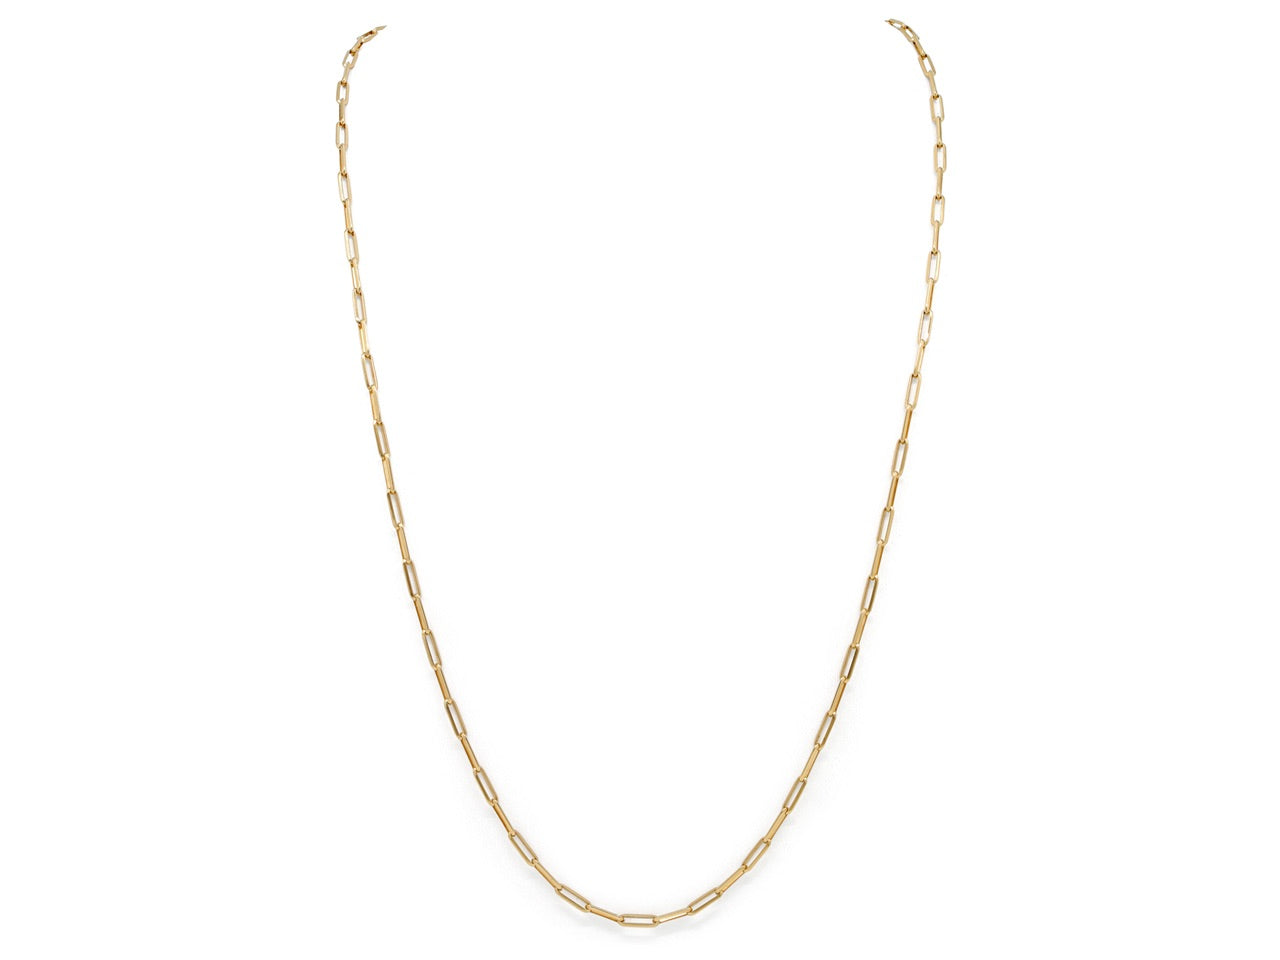 Italian Gold Chain Necklace, by Beladora